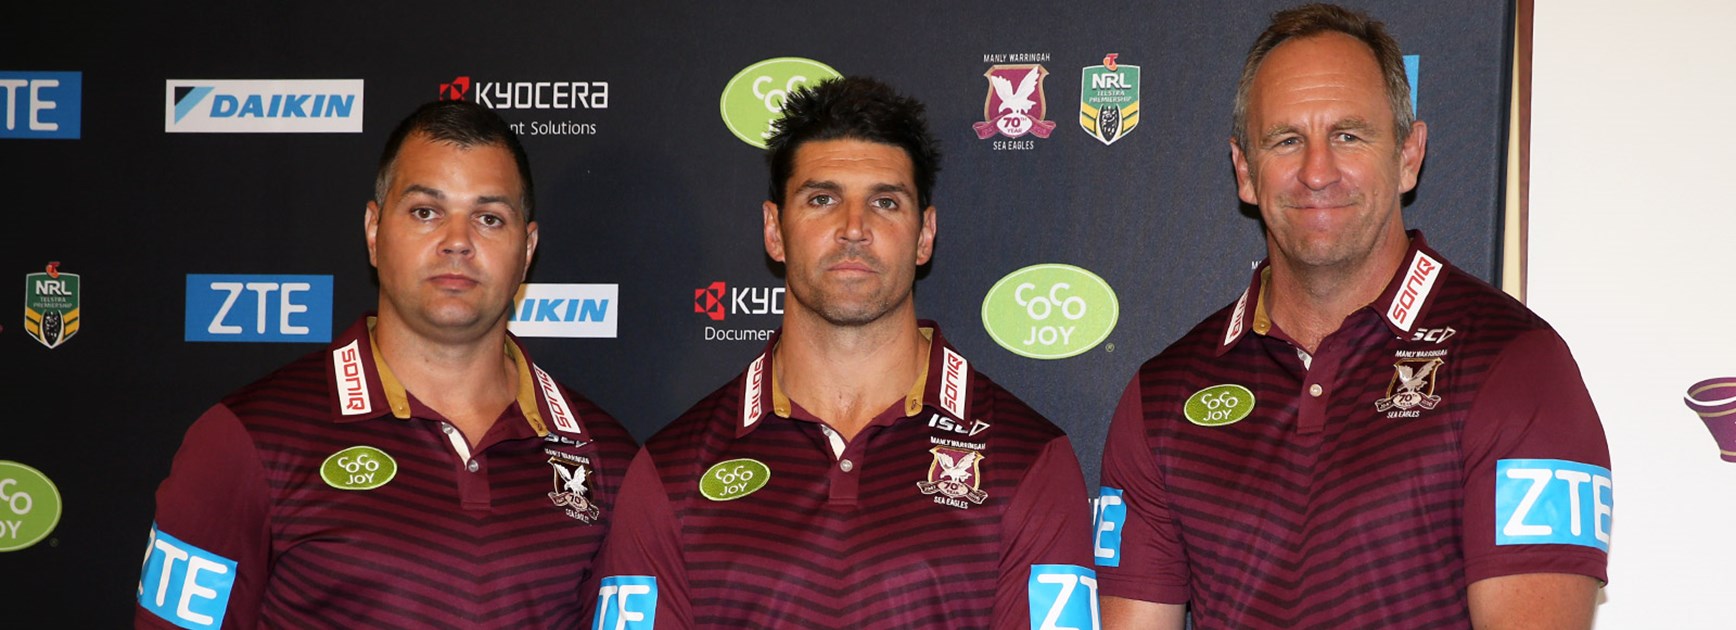 Manly NRL Assistant Coach Anthony Seibiold, Head Coach Trent Barrett, NRL Assistant Coach/Recruitment Manager John Cartwright.